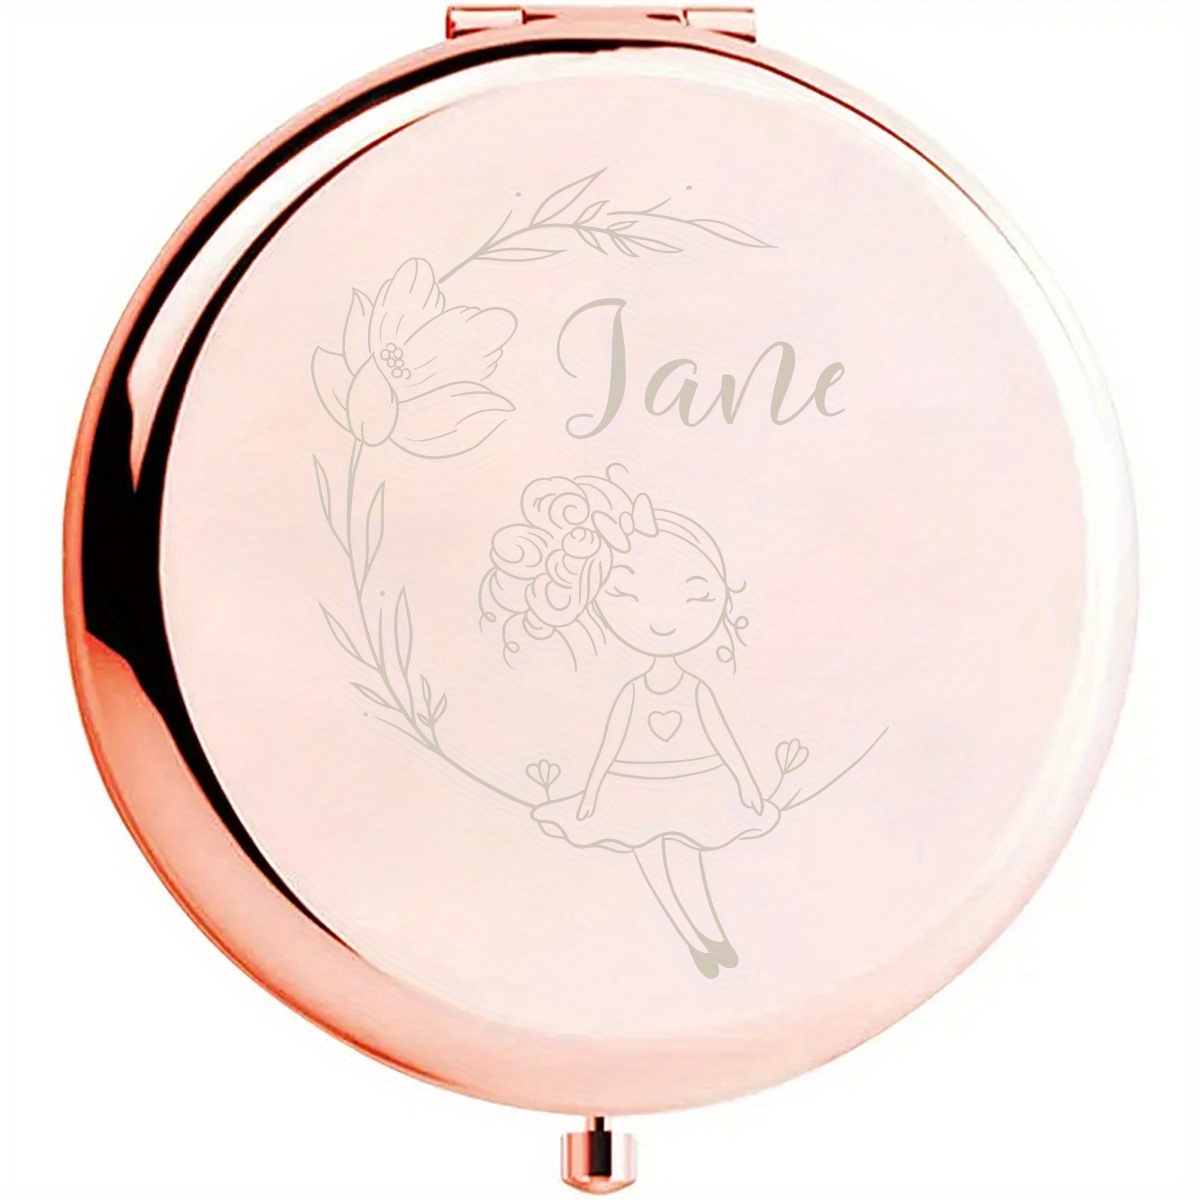 

1pc, Custom Name Mirror Compact Flower Girl Pocket Makeup Folding Mirror Graduation Gift Sister Bridesmaid Friends Party Gift Birthday Valentine's Day Mother's Day Gift